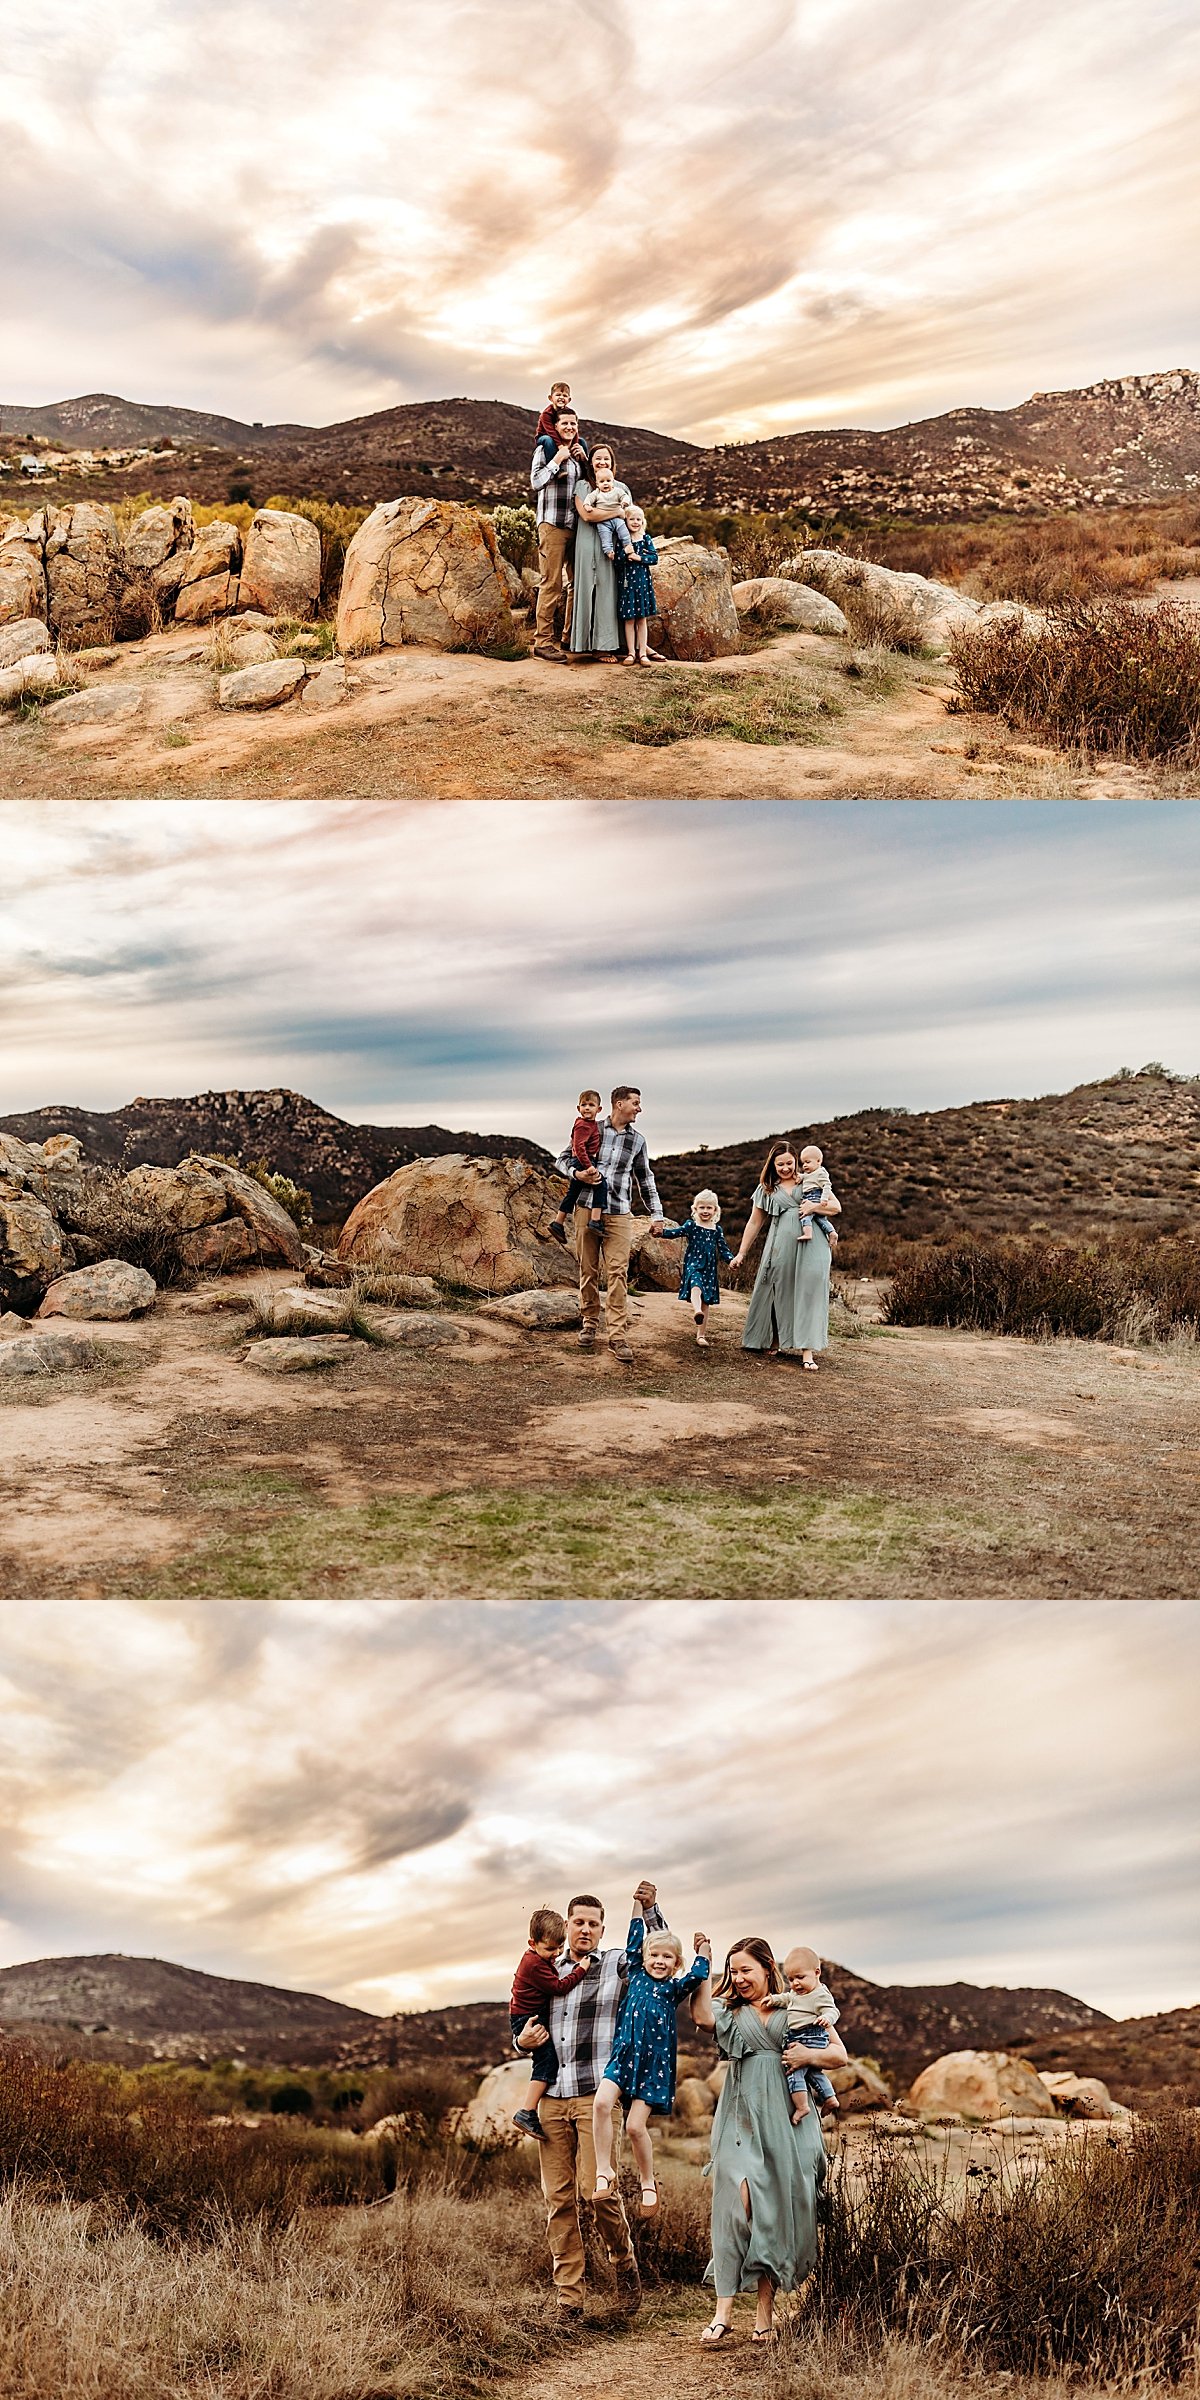  group of five holding hands and walking along dirt path by Christa paustenbaugh photography 